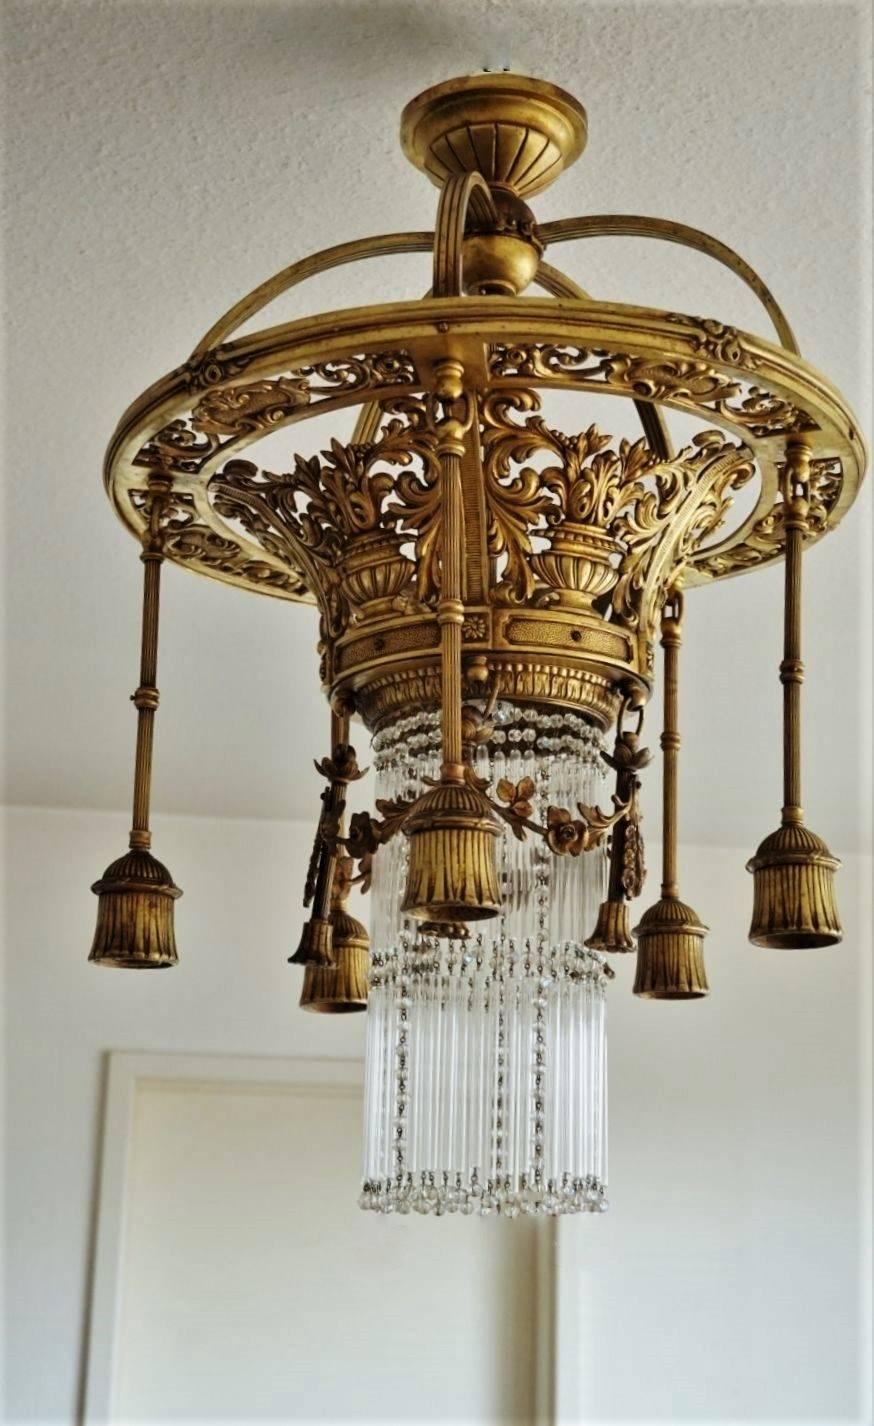 Empire style French crown shaped gild bronze six-light chandelier, richly ornate with floral motifs and decorated with garlands, five-arm surrounding the long glass rods and crystal pearls.
European wiring: Six E27 bulb sockets . Rewired and ready